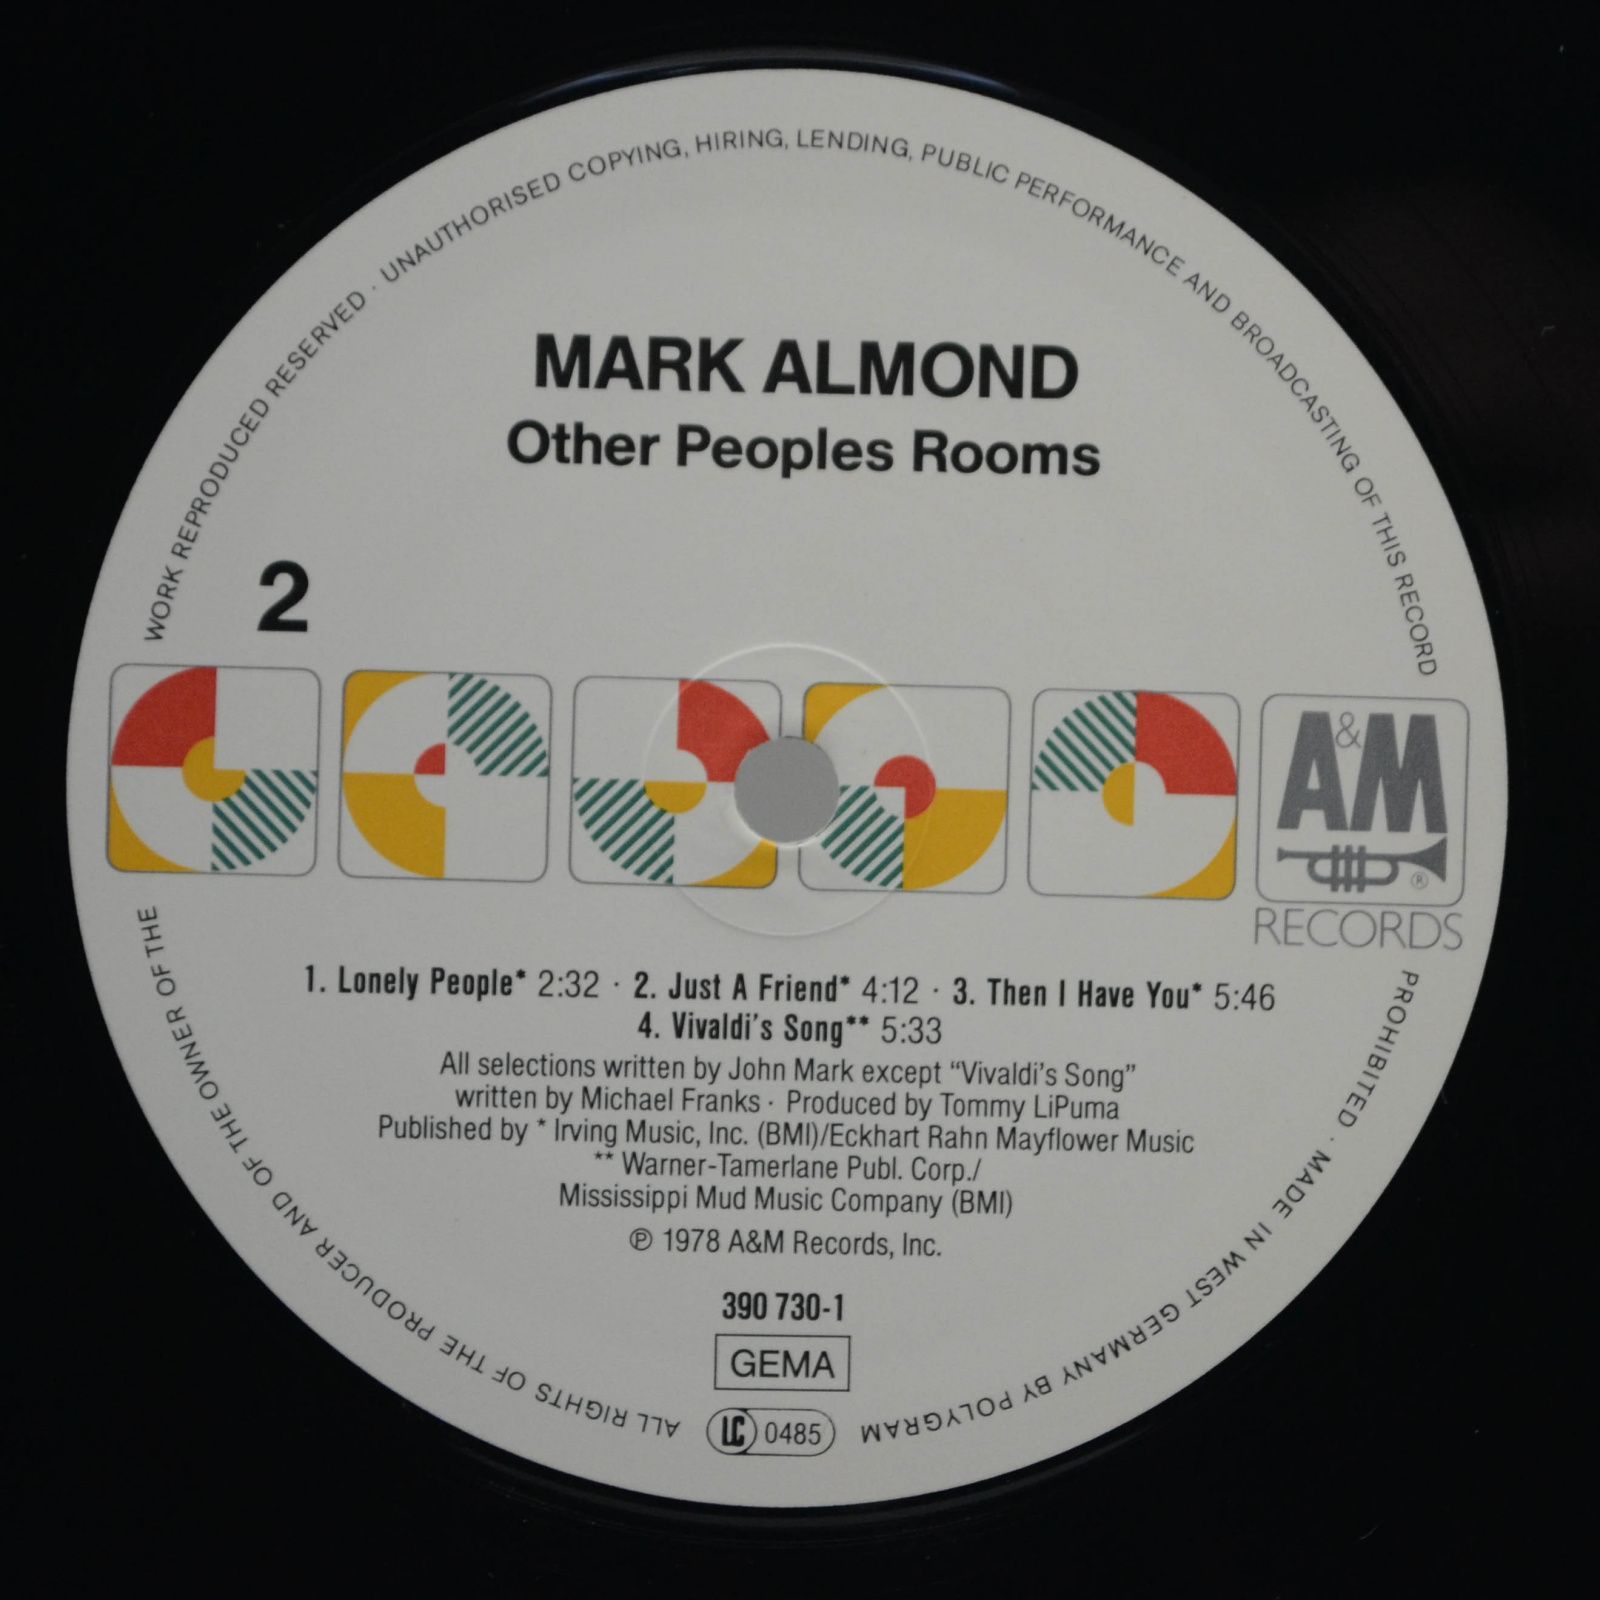 Mark Almond — Other Peoples Rooms, 1978